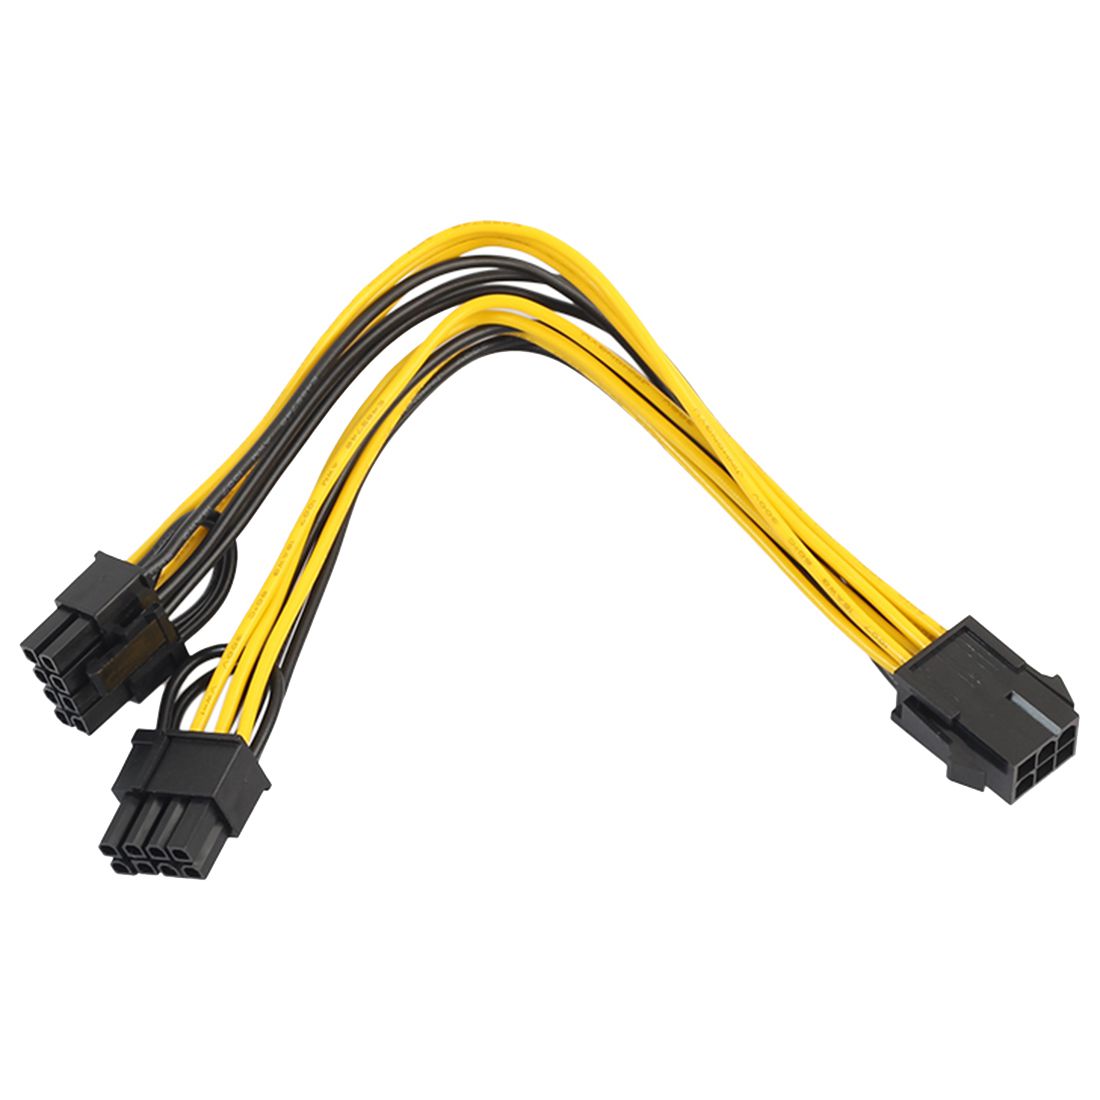 6pin to 8pin power cable video card computer motherboard 6p to 8p power supply transfer cable
